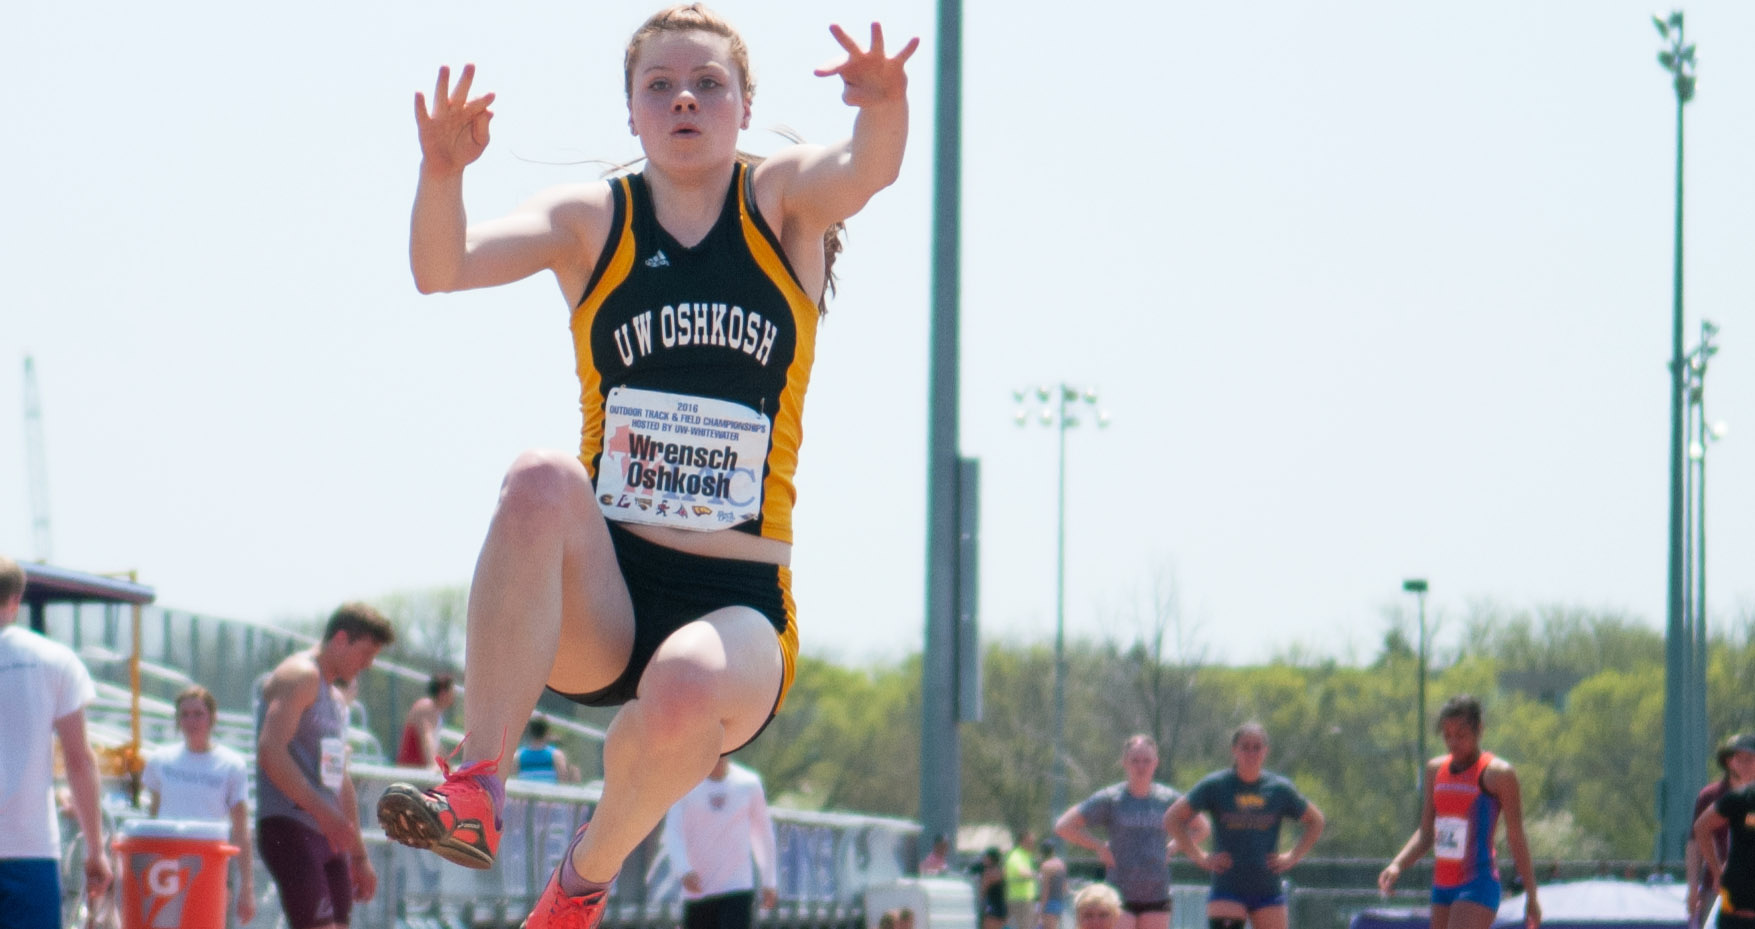 Lauren Wrensch finished fourth in the long jump and eighth in the 200-meter dash at the UW-Platteville Invitational.